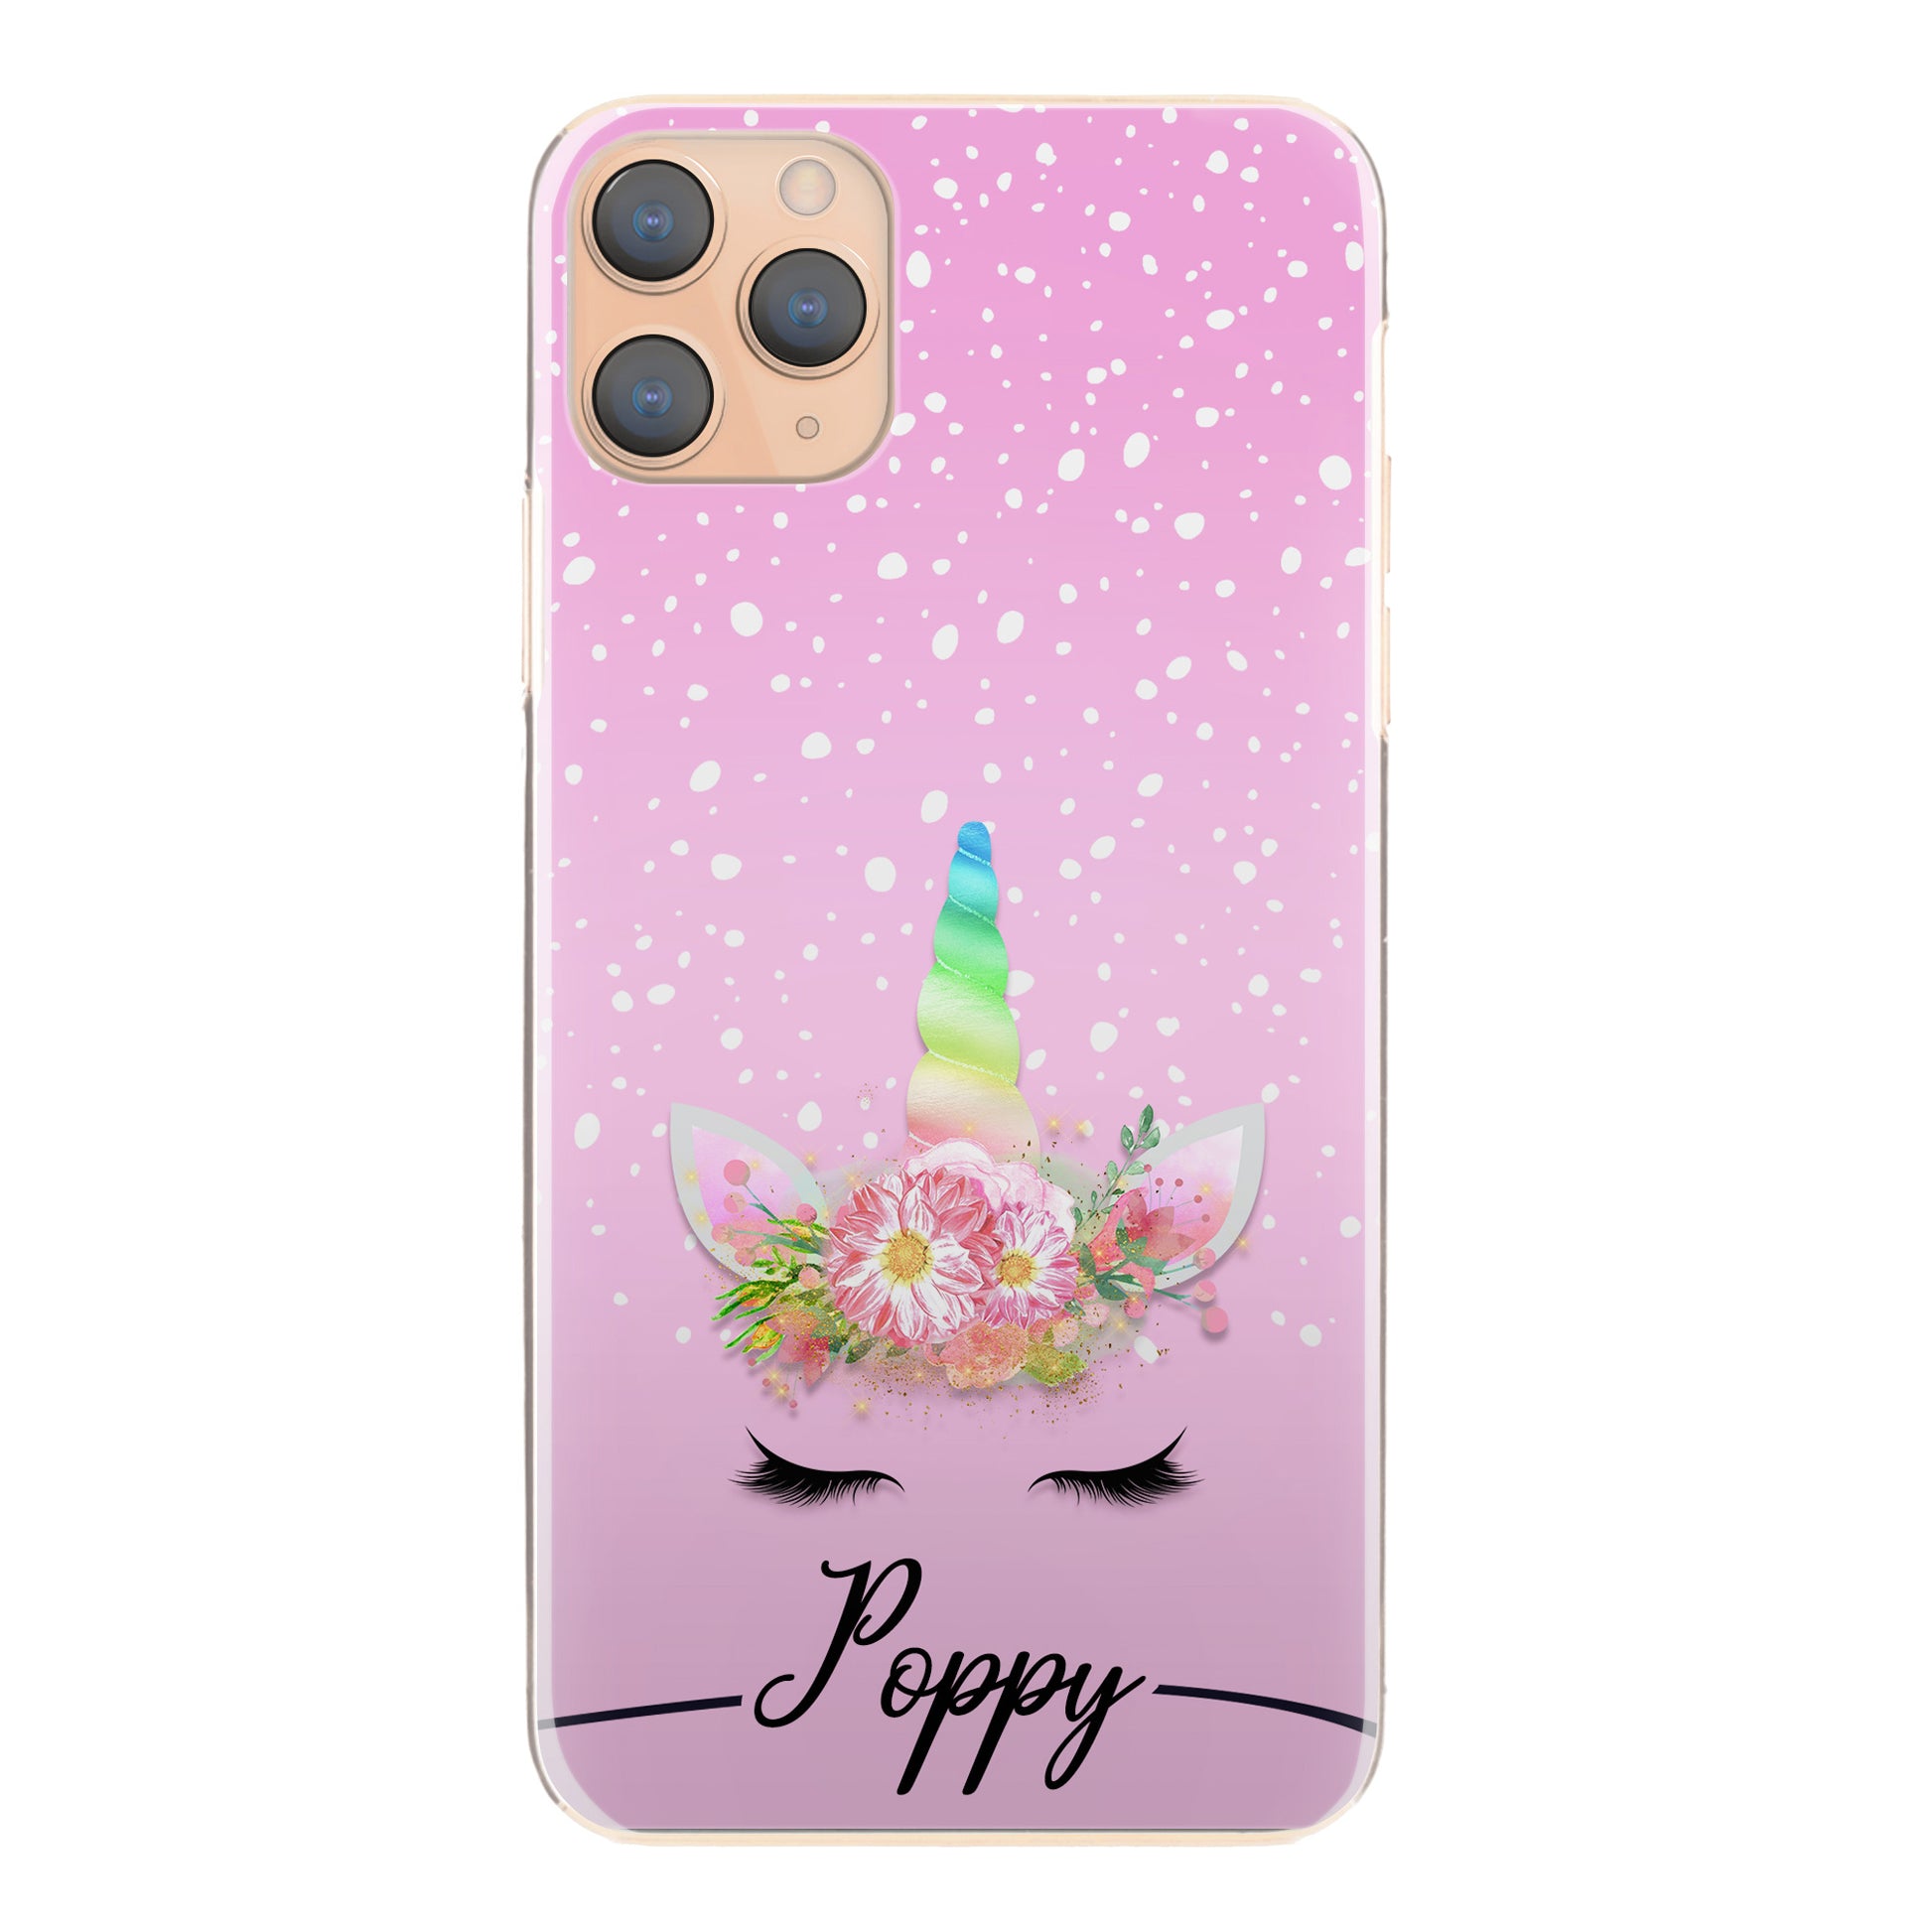 Personalised Huawei Phone Hard Case with Rainbow Floral Unicorn and Text on Pink